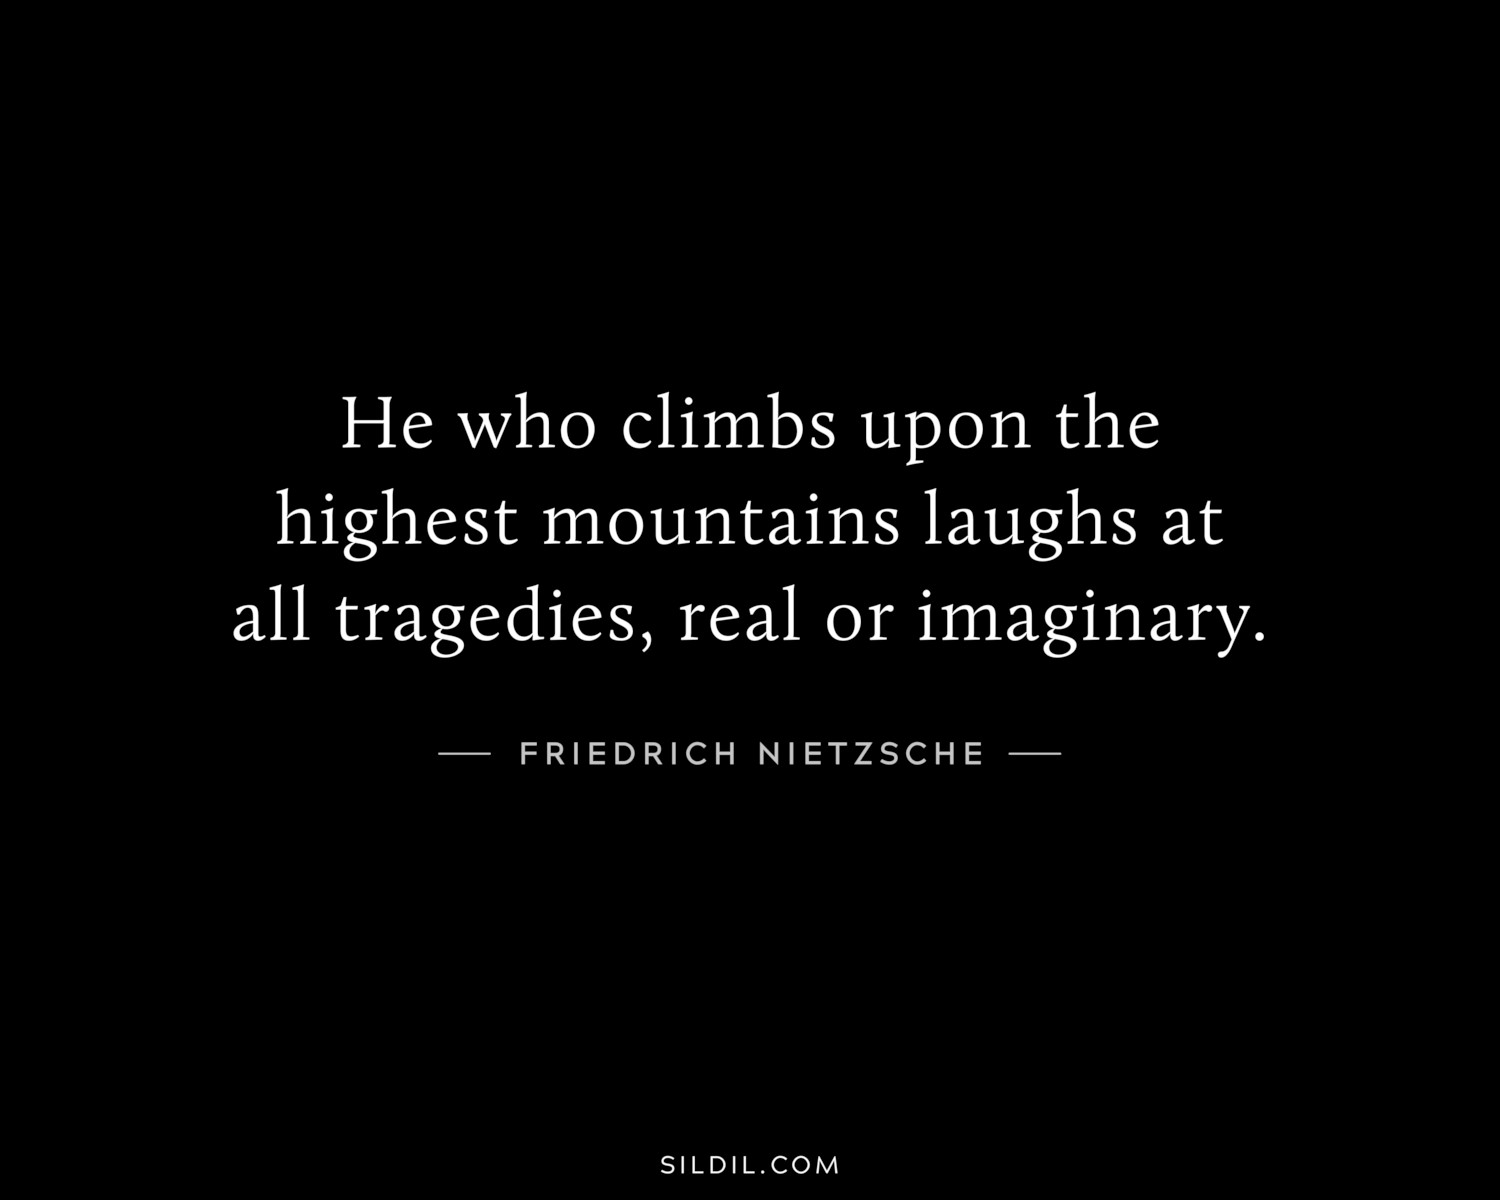 He who climbs upon the highest mountains laughs at all tragedies, real or imaginary.